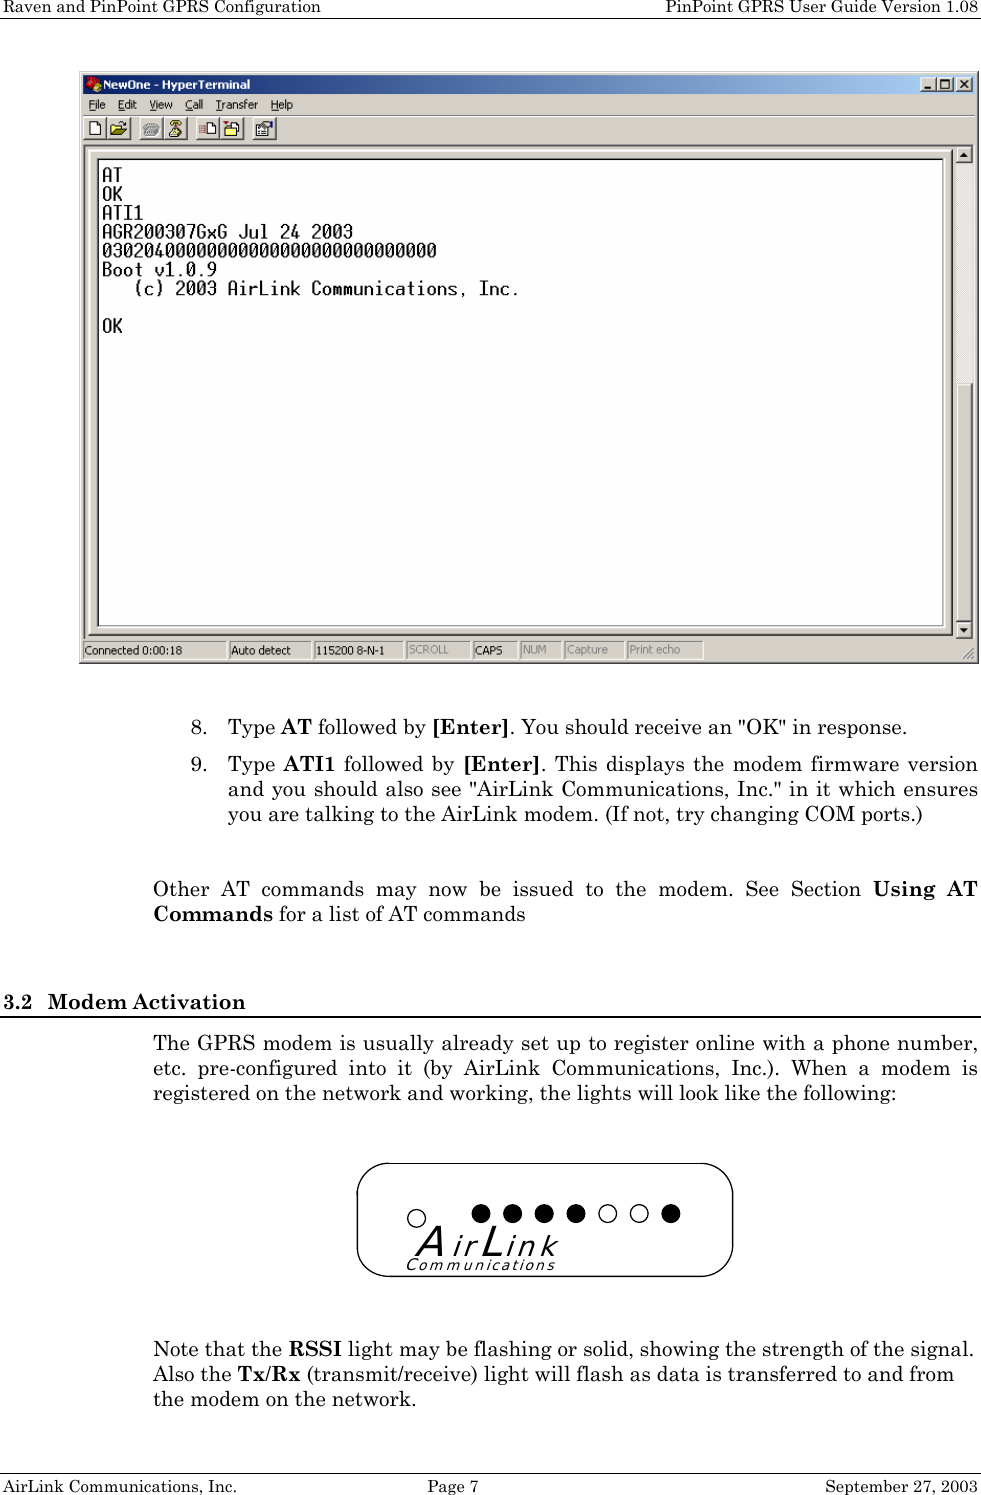 Raven and PinPoint GPRS Configuration    PinPoint GPRS User Guide Version 1.08 AirLink Communications, Inc.  Page 7  September 27, 2003  8. Type AT followed by [Enter]. You should receive an &quot;OK&quot; in response. 9. Type ATI1 followed by [Enter]. This displays the modem firmware version and you should also see &quot;AirLink Communications, Inc.&quot; in it which ensures you are talking to the AirLink modem. (If not, try changing COM ports.)  Other AT commands may now be issued to the modem. See Section Using AT Commands for a list of AT commands   3.2 Modem Activation The GPRS modem is usually already set up to register online with a phone number, etc. pre-configured into it (by AirLink Communications, Inc.). When a modem is registered on the network and working, the lights will look like the following: Note that the RSSI light may be flashing or solid, showing the strength of the signal. Also the Tx/Rx (transmit/receive) light will flash as data is transferred to and from the modem on the network. AirLinkCommunications